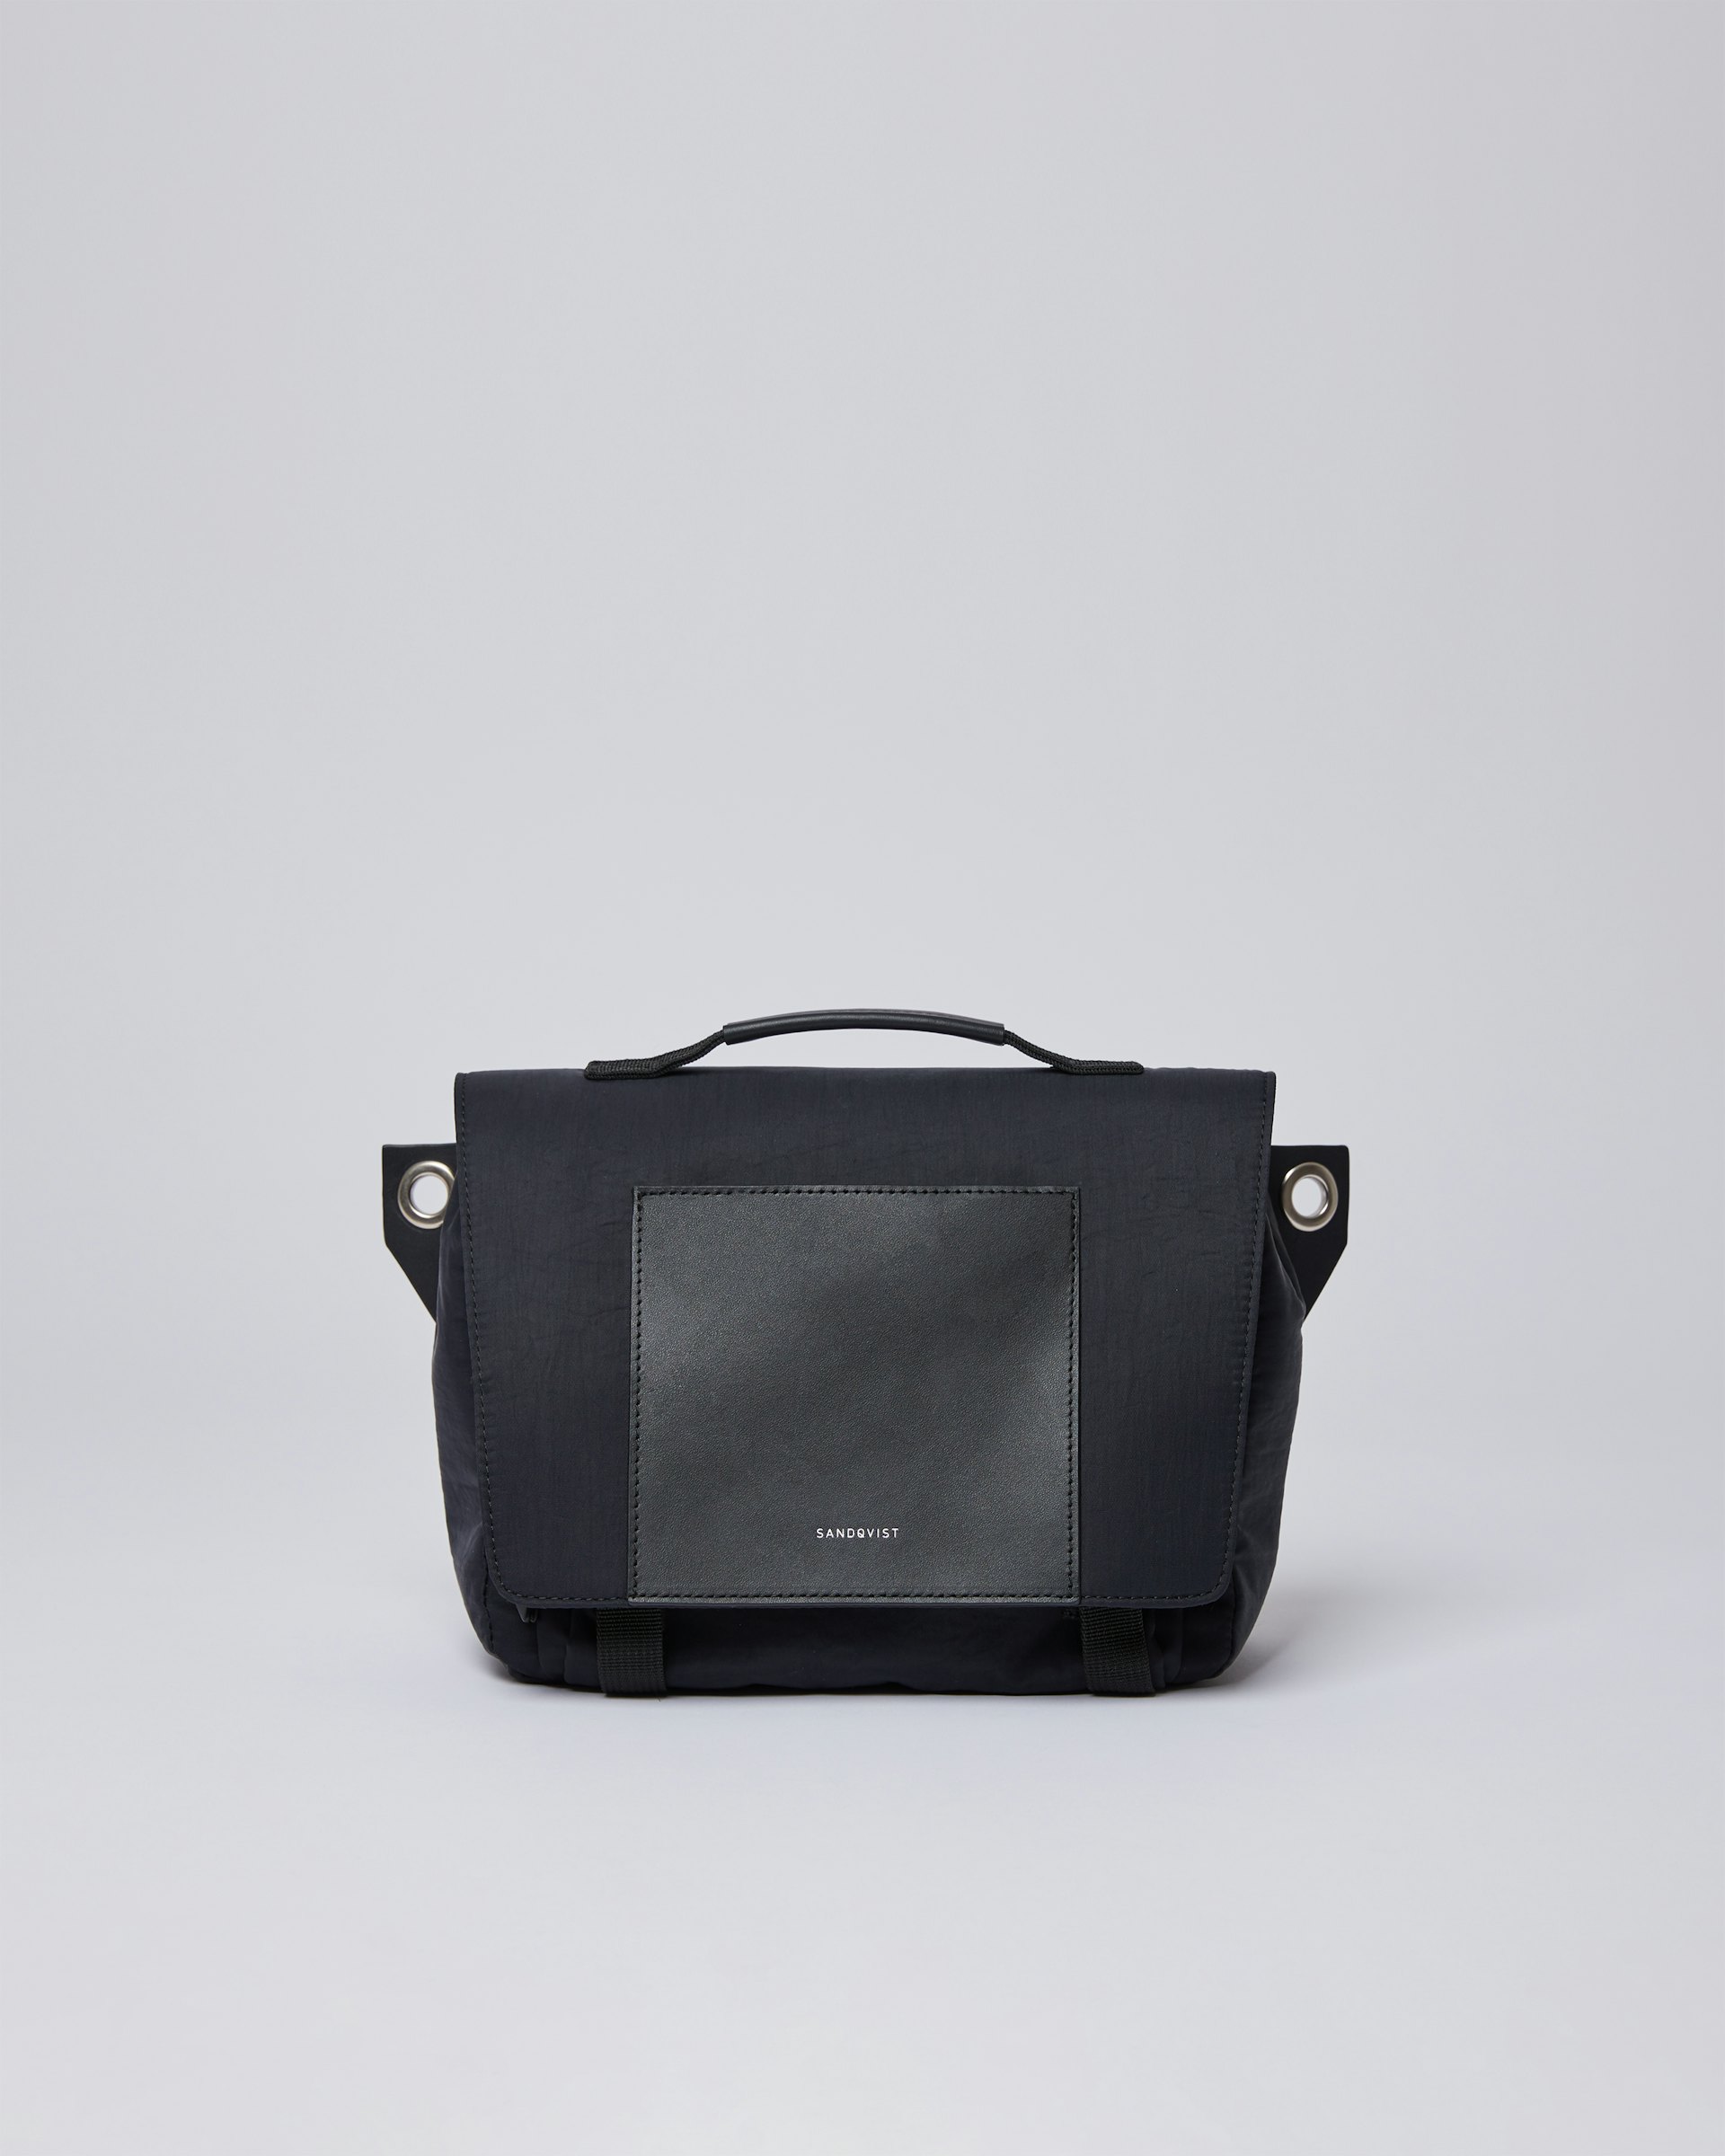 Solveig belongs to the category Shoulder bags and is in color black